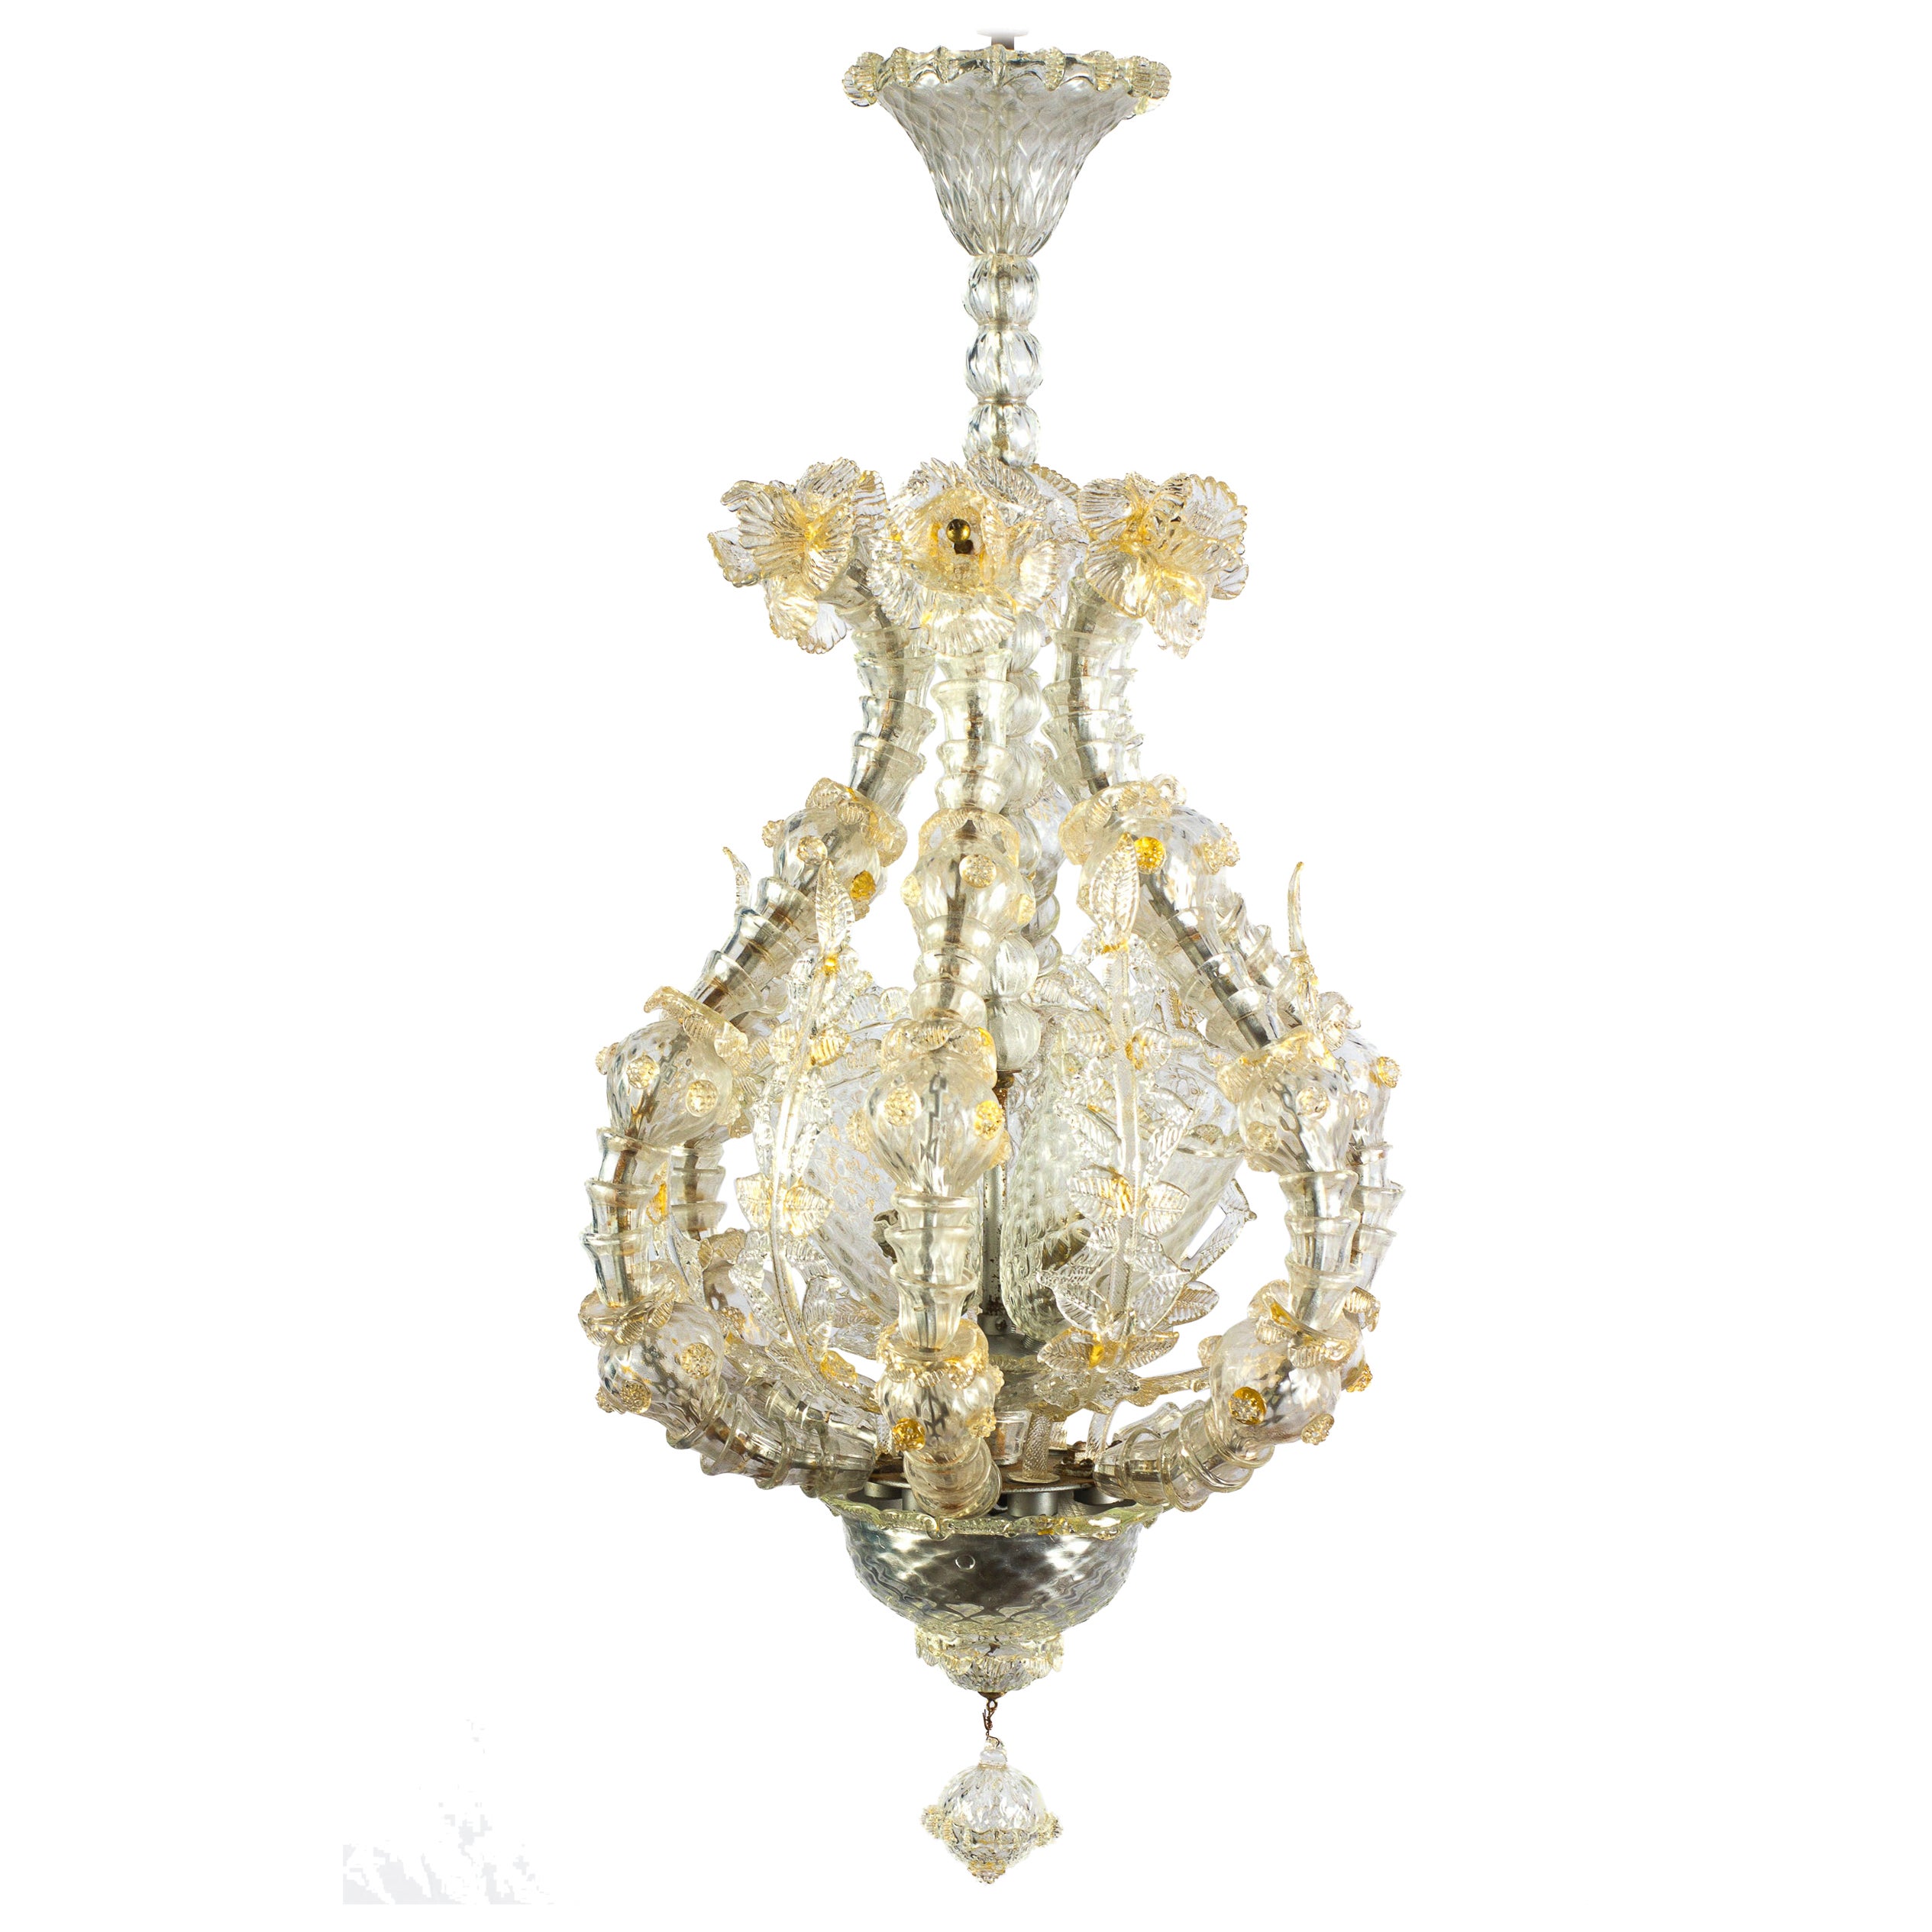 Overwhelming Murano Glass Lantern or Chandelier by Barovier & Toso, 1940' For Sale